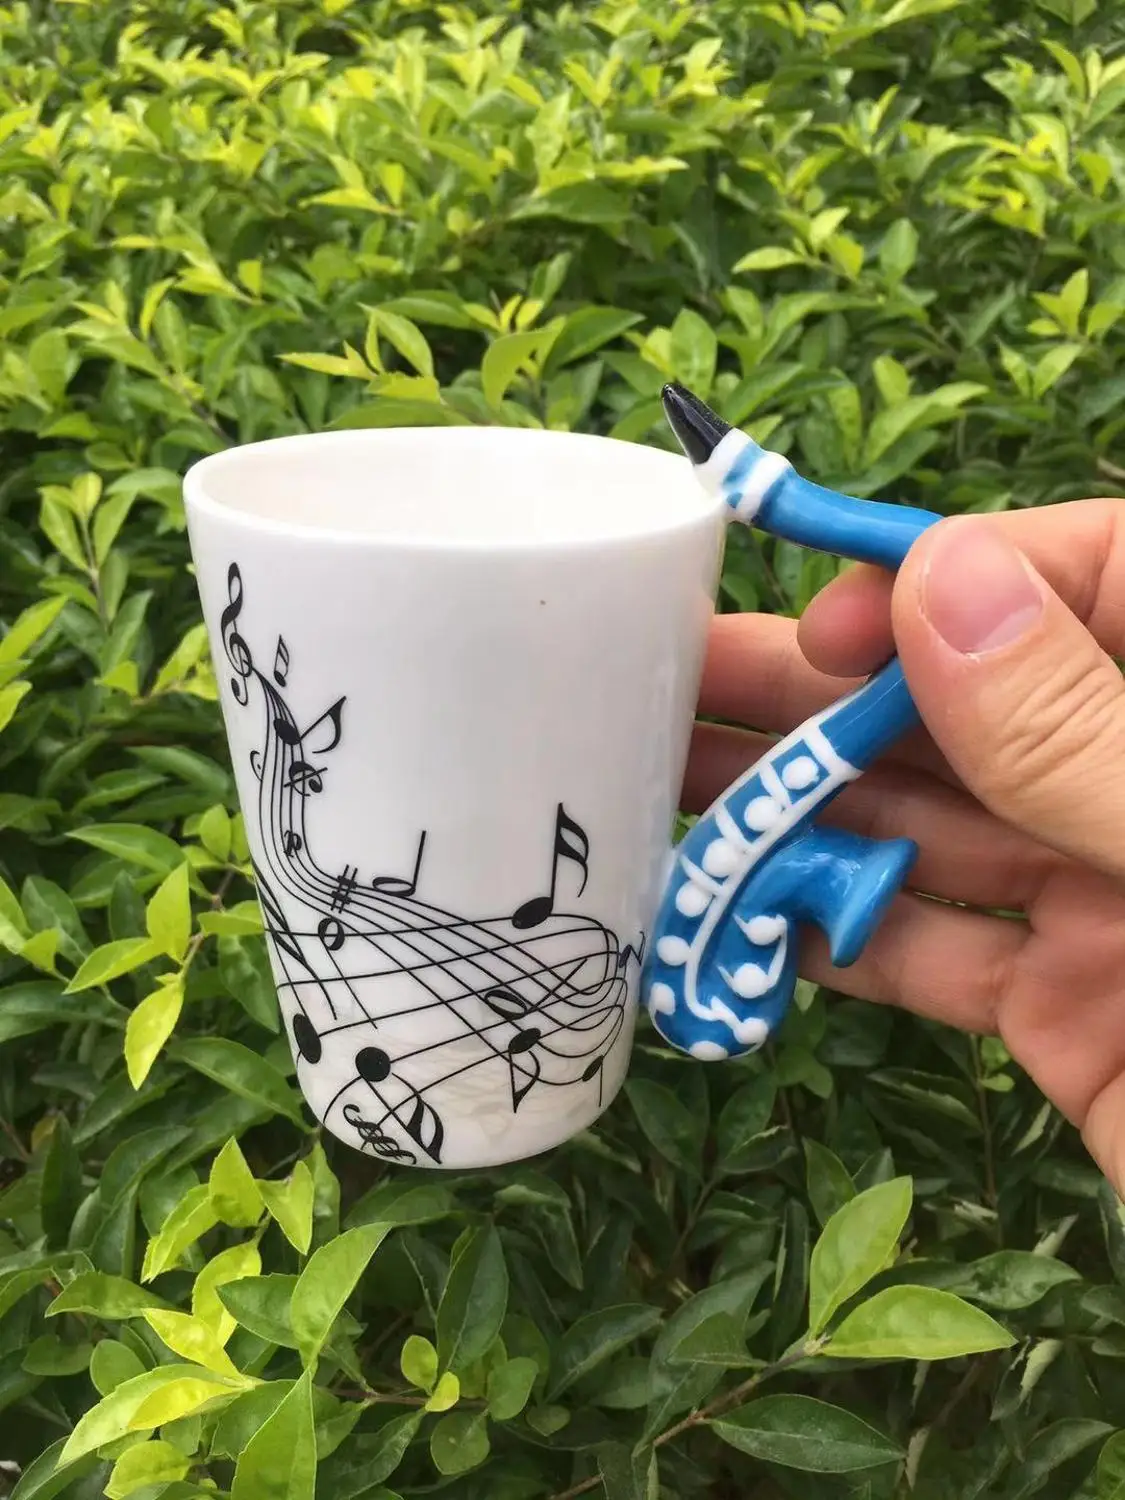 Details about   Puerto Rico MINI Coffee Cup with Spoon Handel Ceramics MINI Mug Musical 